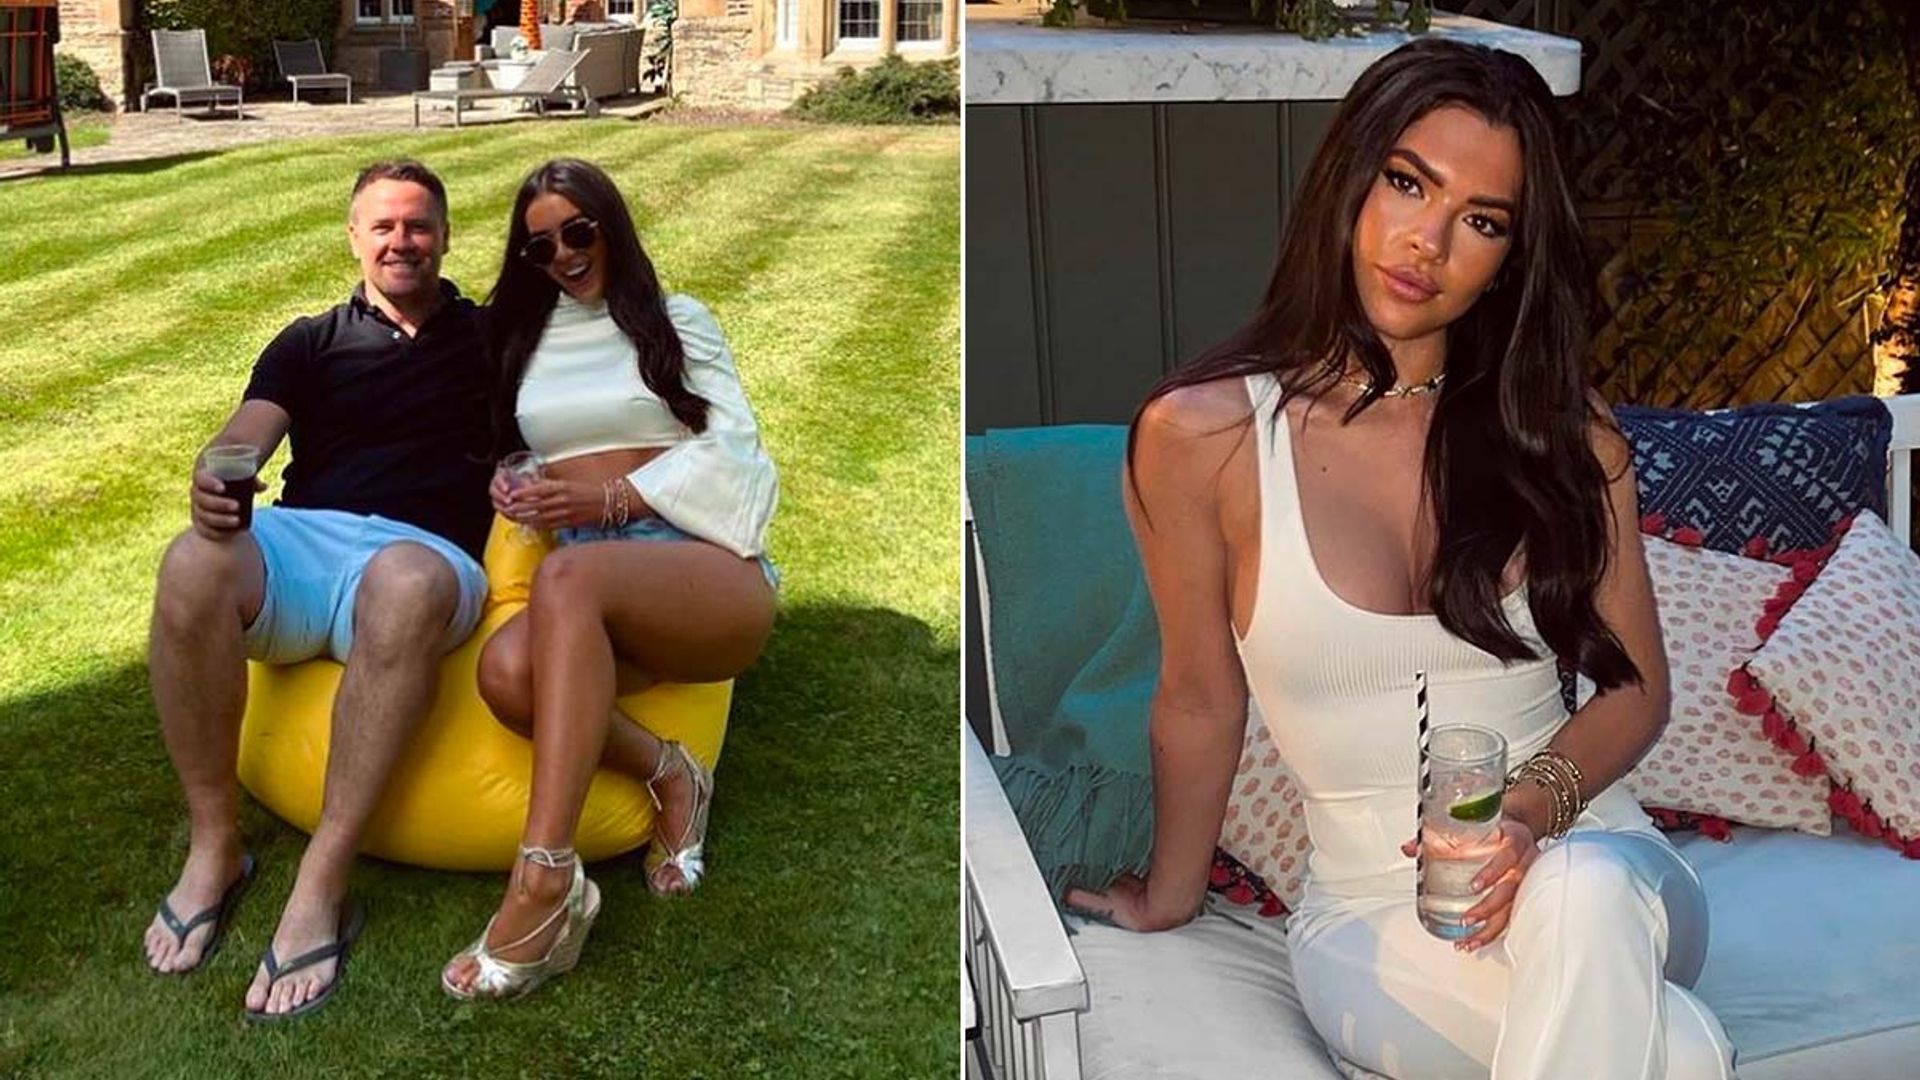 Love Island's Gemma Owen's garden at £4million mansion could rival a royal residence